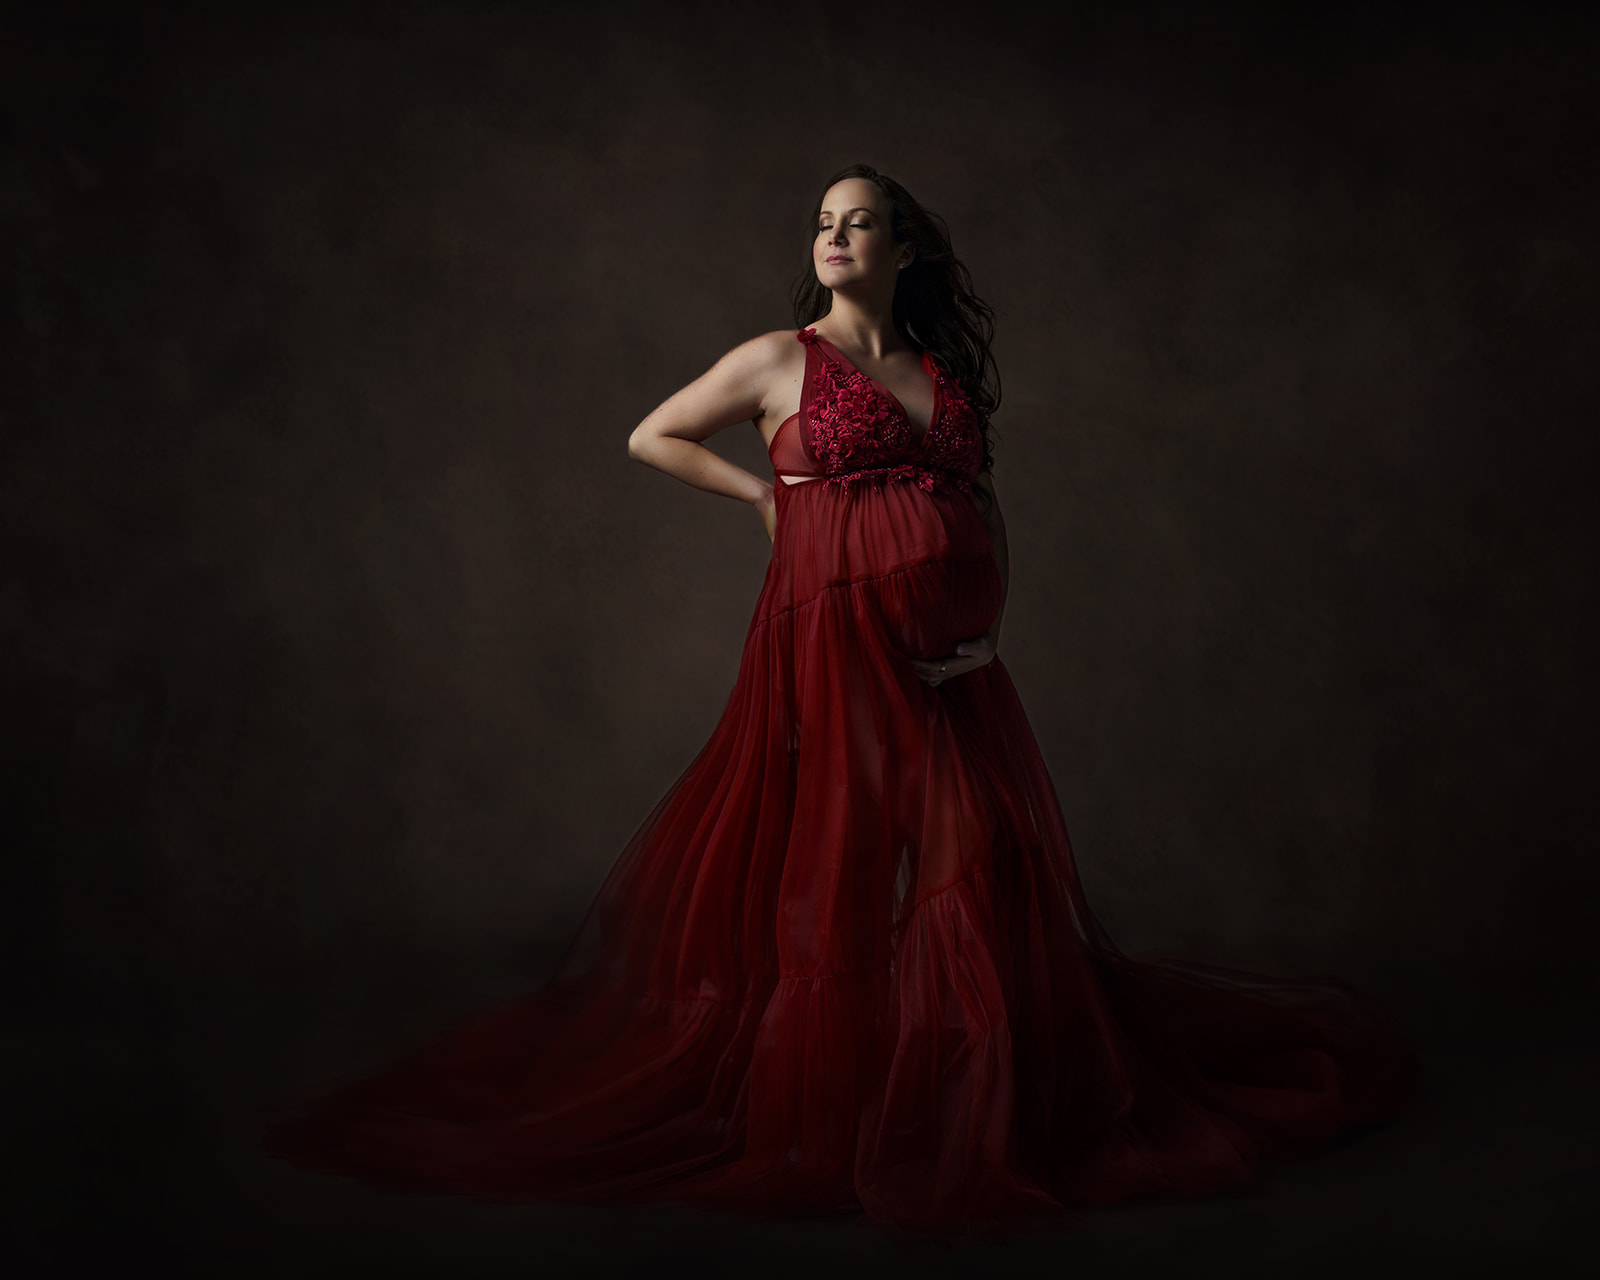 A custom maternity session with a glamor style